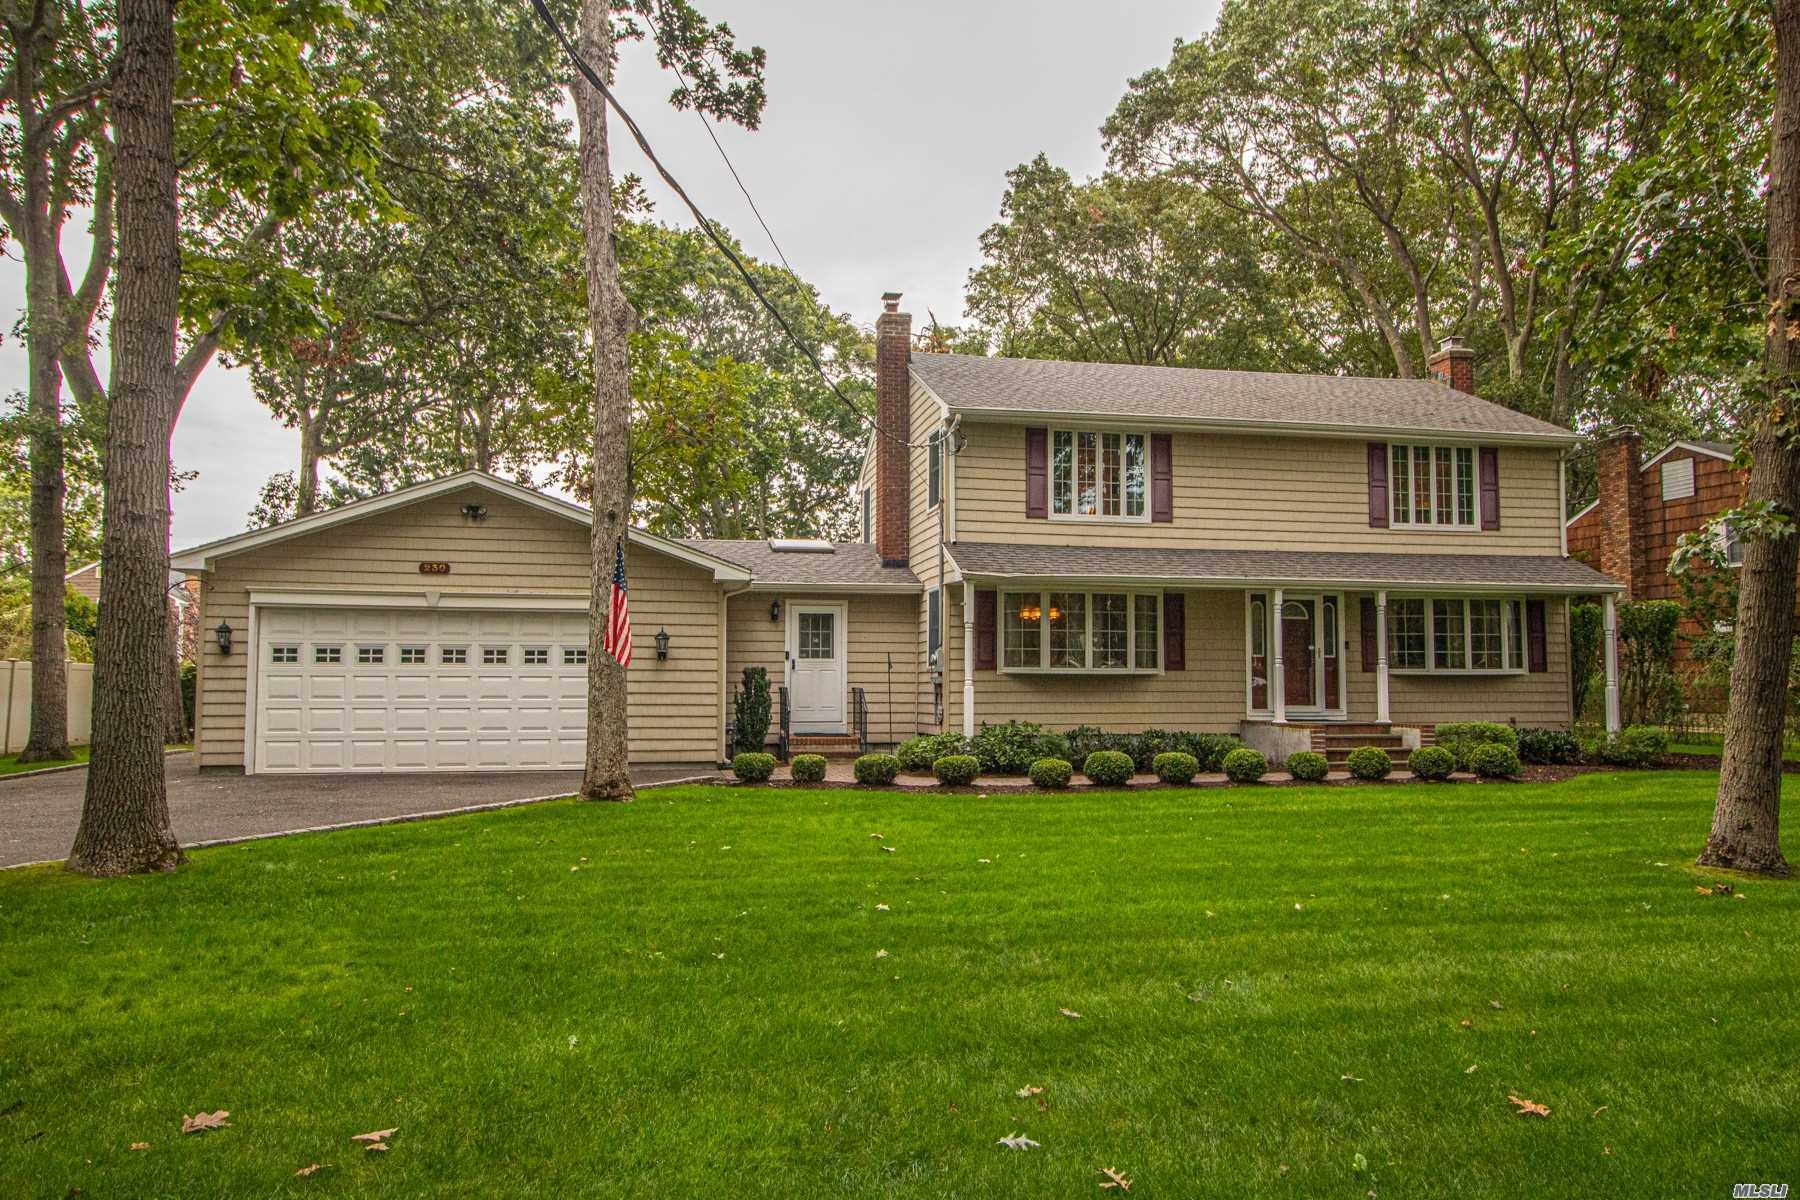 A Classic Center Hall Colonial Boasts 4 Lg Bedrooms and 2.5 baths. Over a 1/2 Acre of Professionally Landscaped Prop. Archit Roof with Oversized Bay Windows, Gas Conv with BaseBrd Heating, 6 zone IG Sprinklers, Central Air, Full Basement with 8ft Ceilings w/2 Bonus Rooms and an OSE. Large Breezeway with 1/2 Bath, Washer, Dryer and Sliding Doors to outside deck overlooking a Beautiful Large BackYard . Quiet, Private In Highly Desirable Great River.East Islip Schools Close to Golf Course and Marinas!